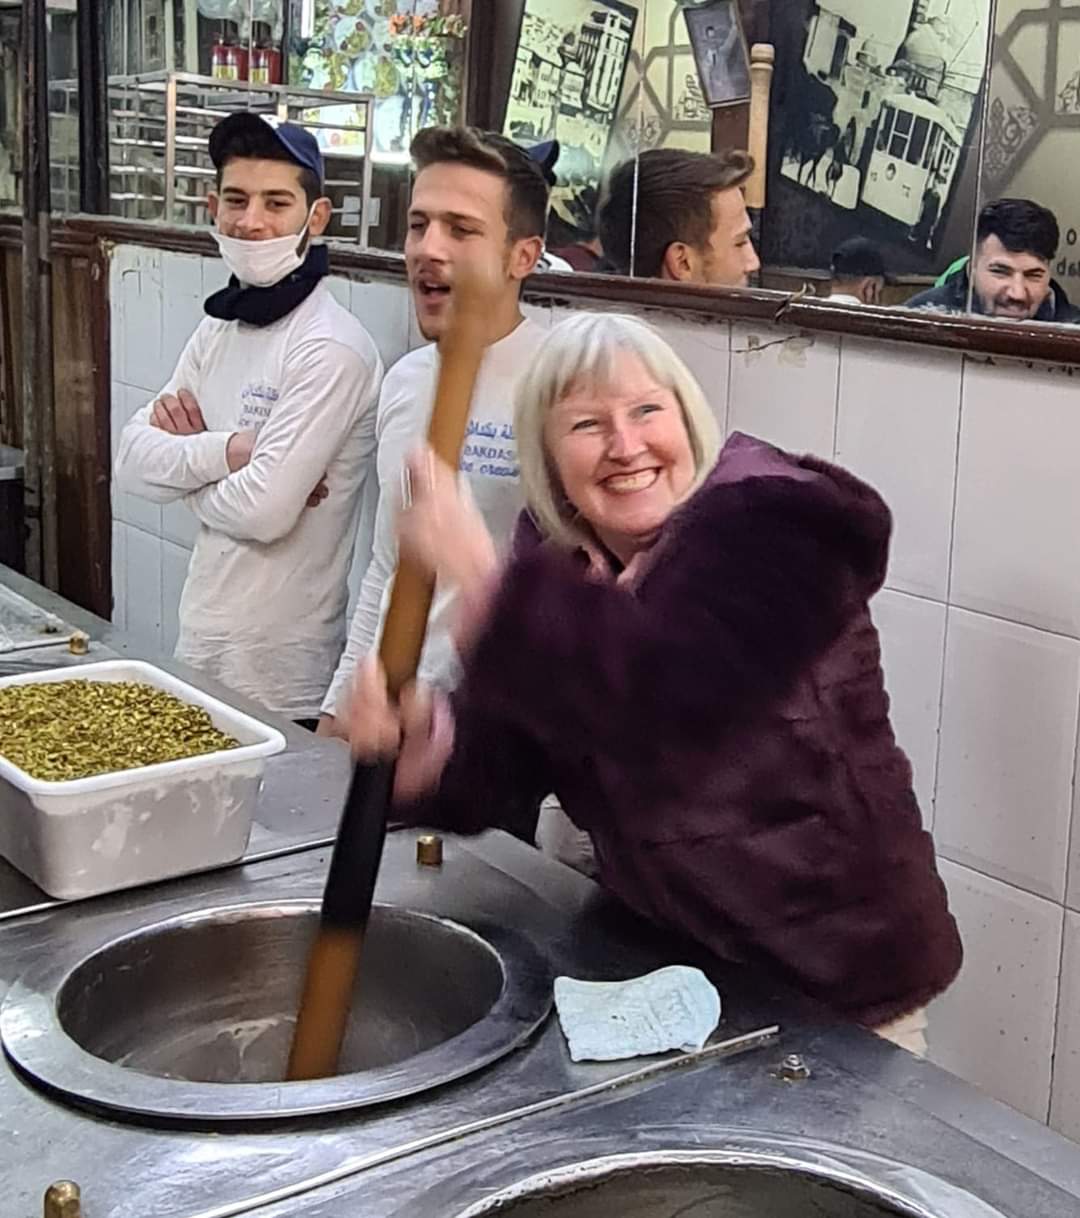 Me helping to churn ice cream in Damascus, Syria